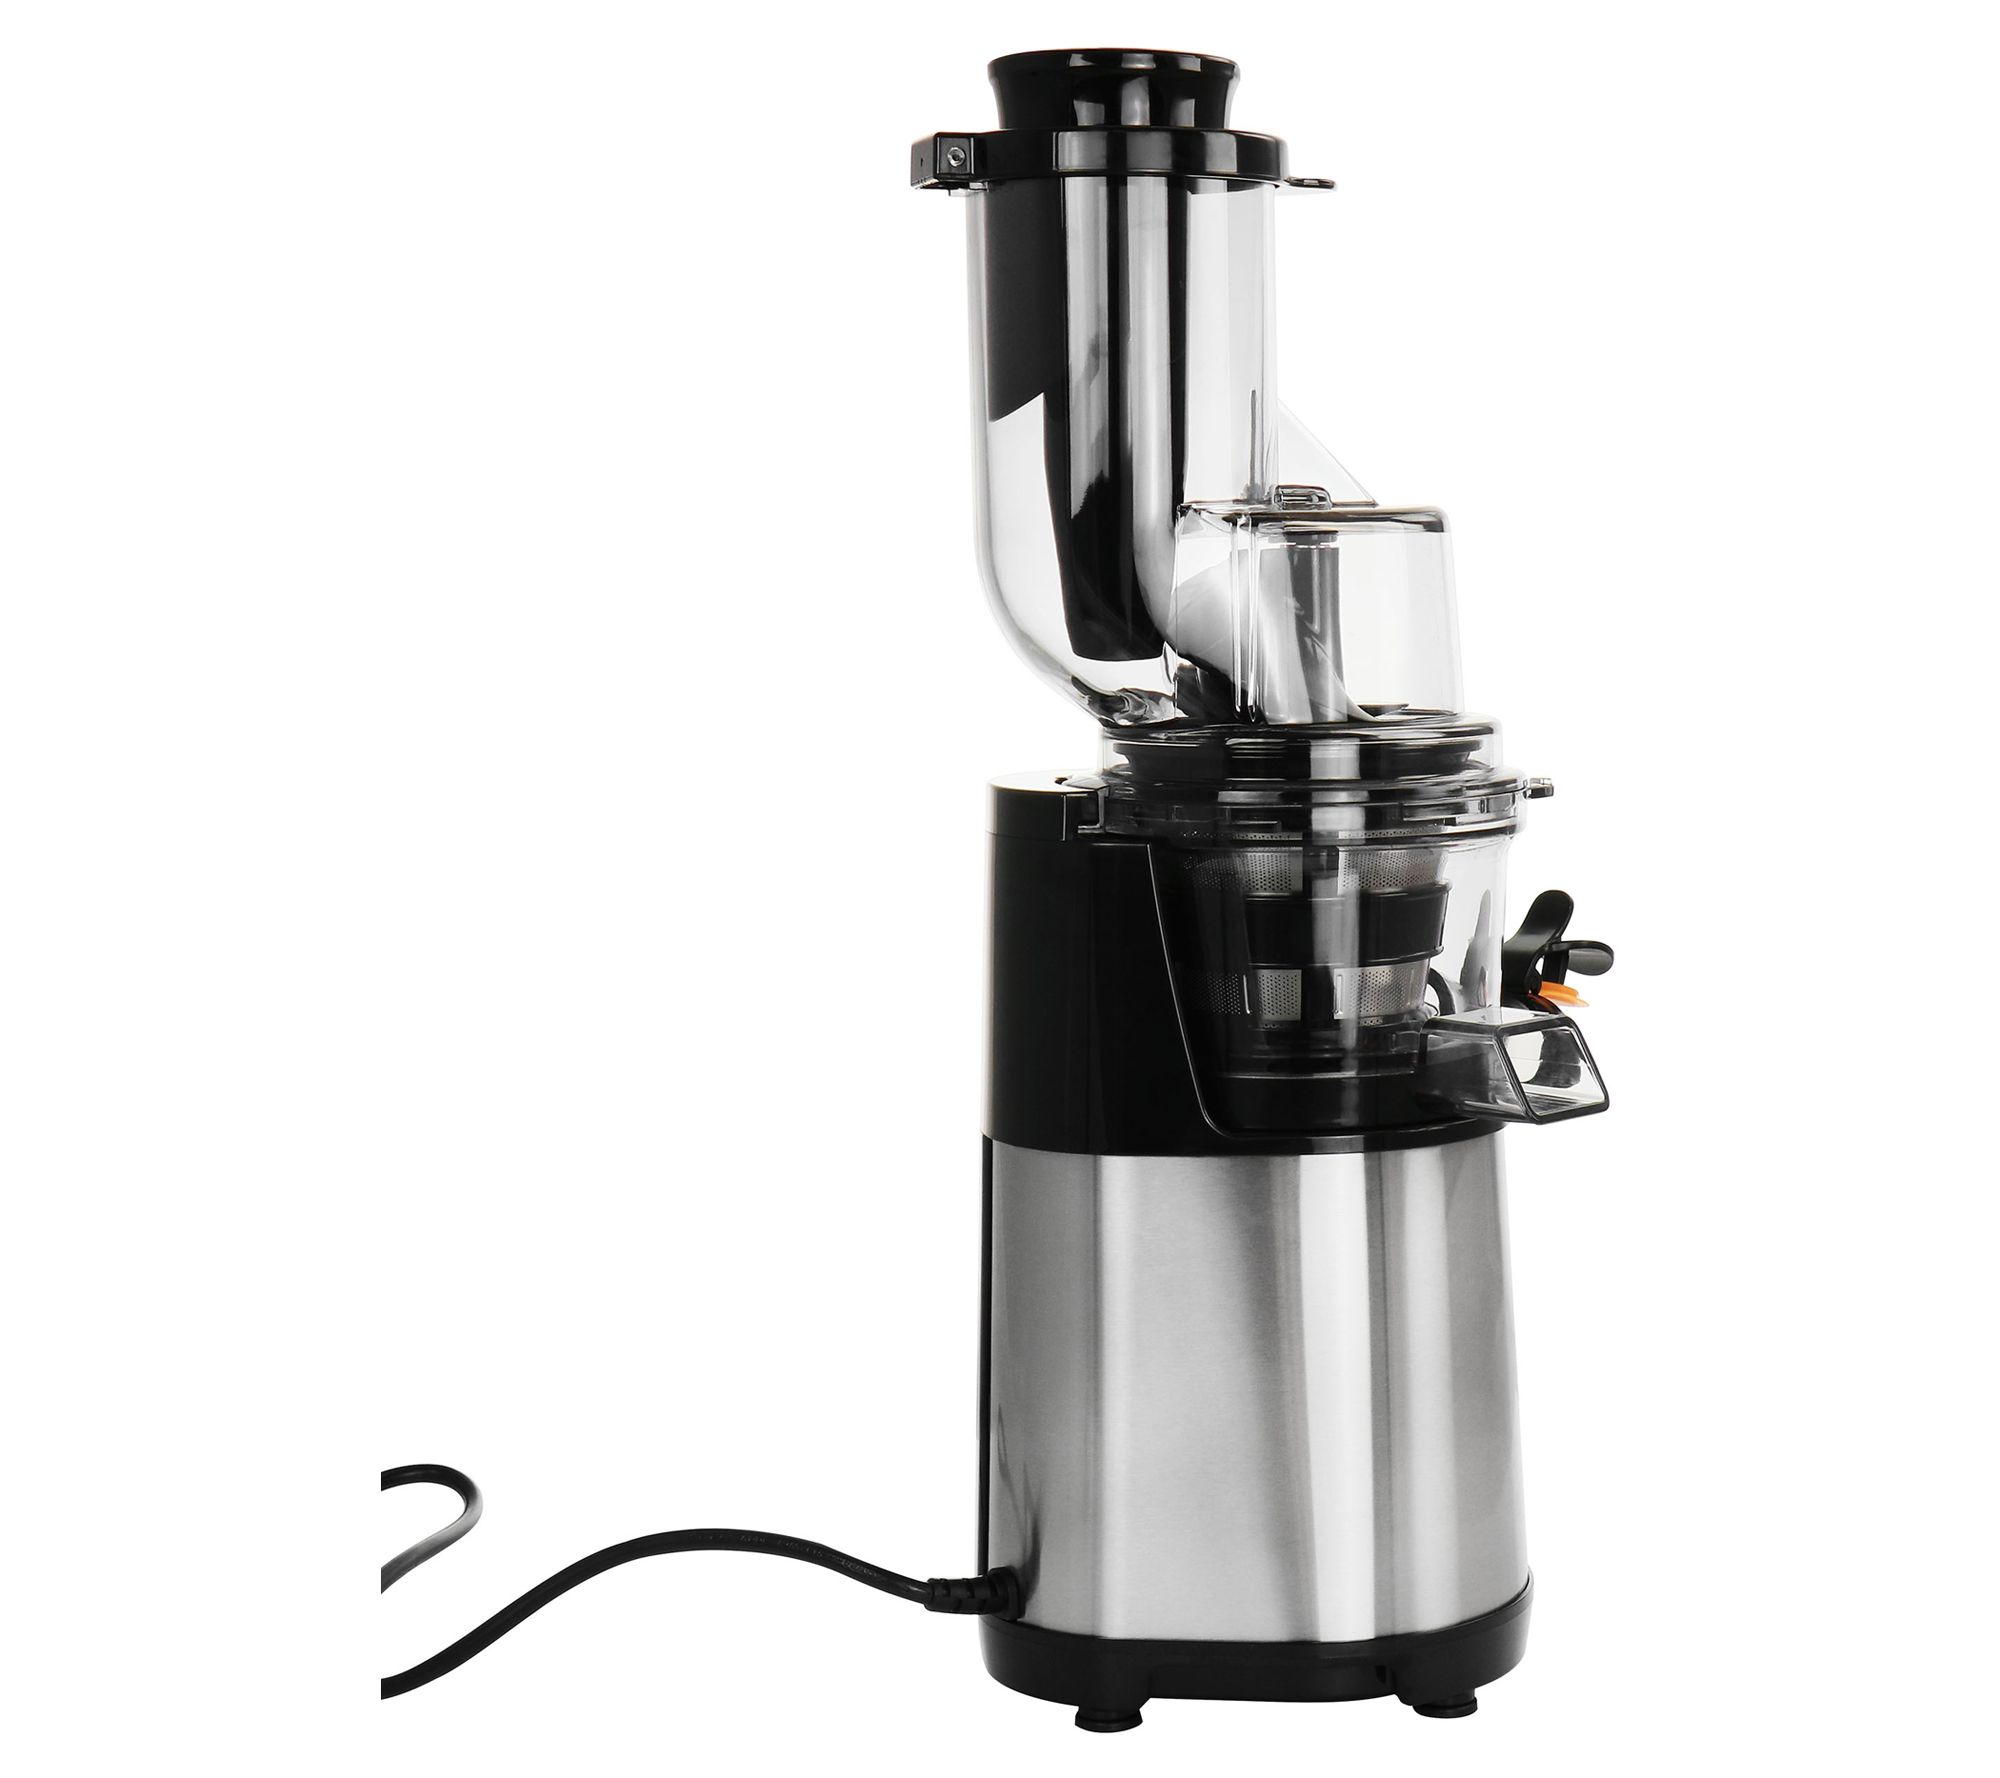 MegaChef Pro Stainless Steel Slow Juicer 985117796M - The Home Depot